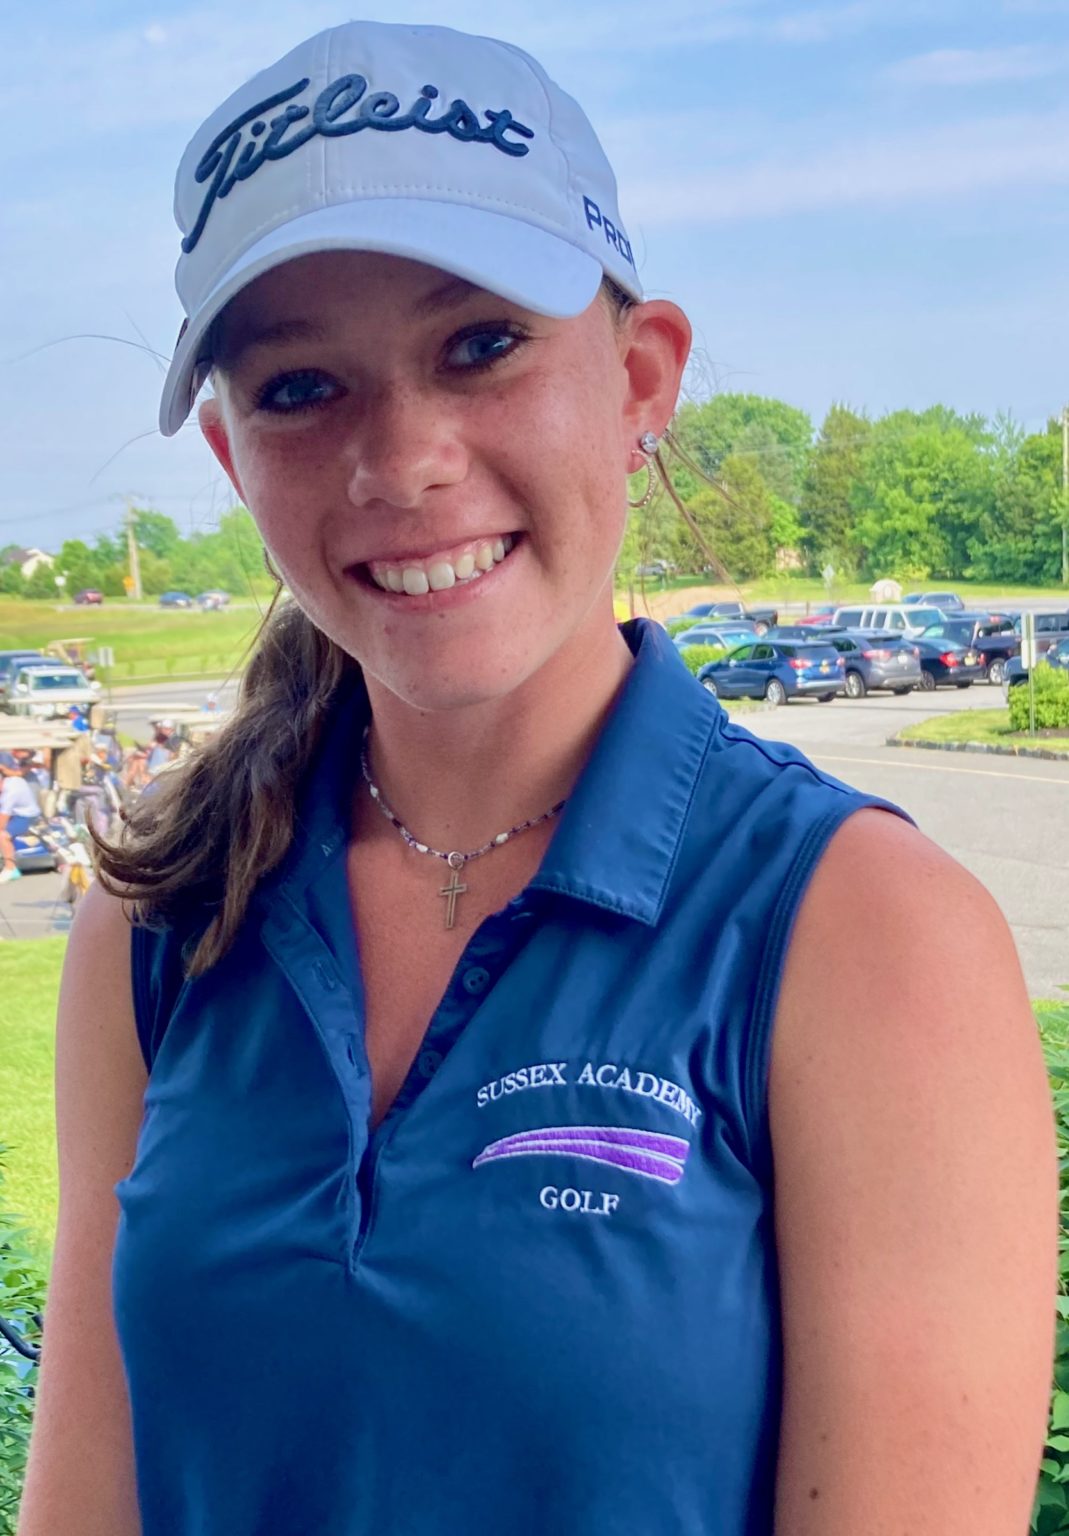 Sussex Academy wins State golf championship – Hannah Lydic makes ...